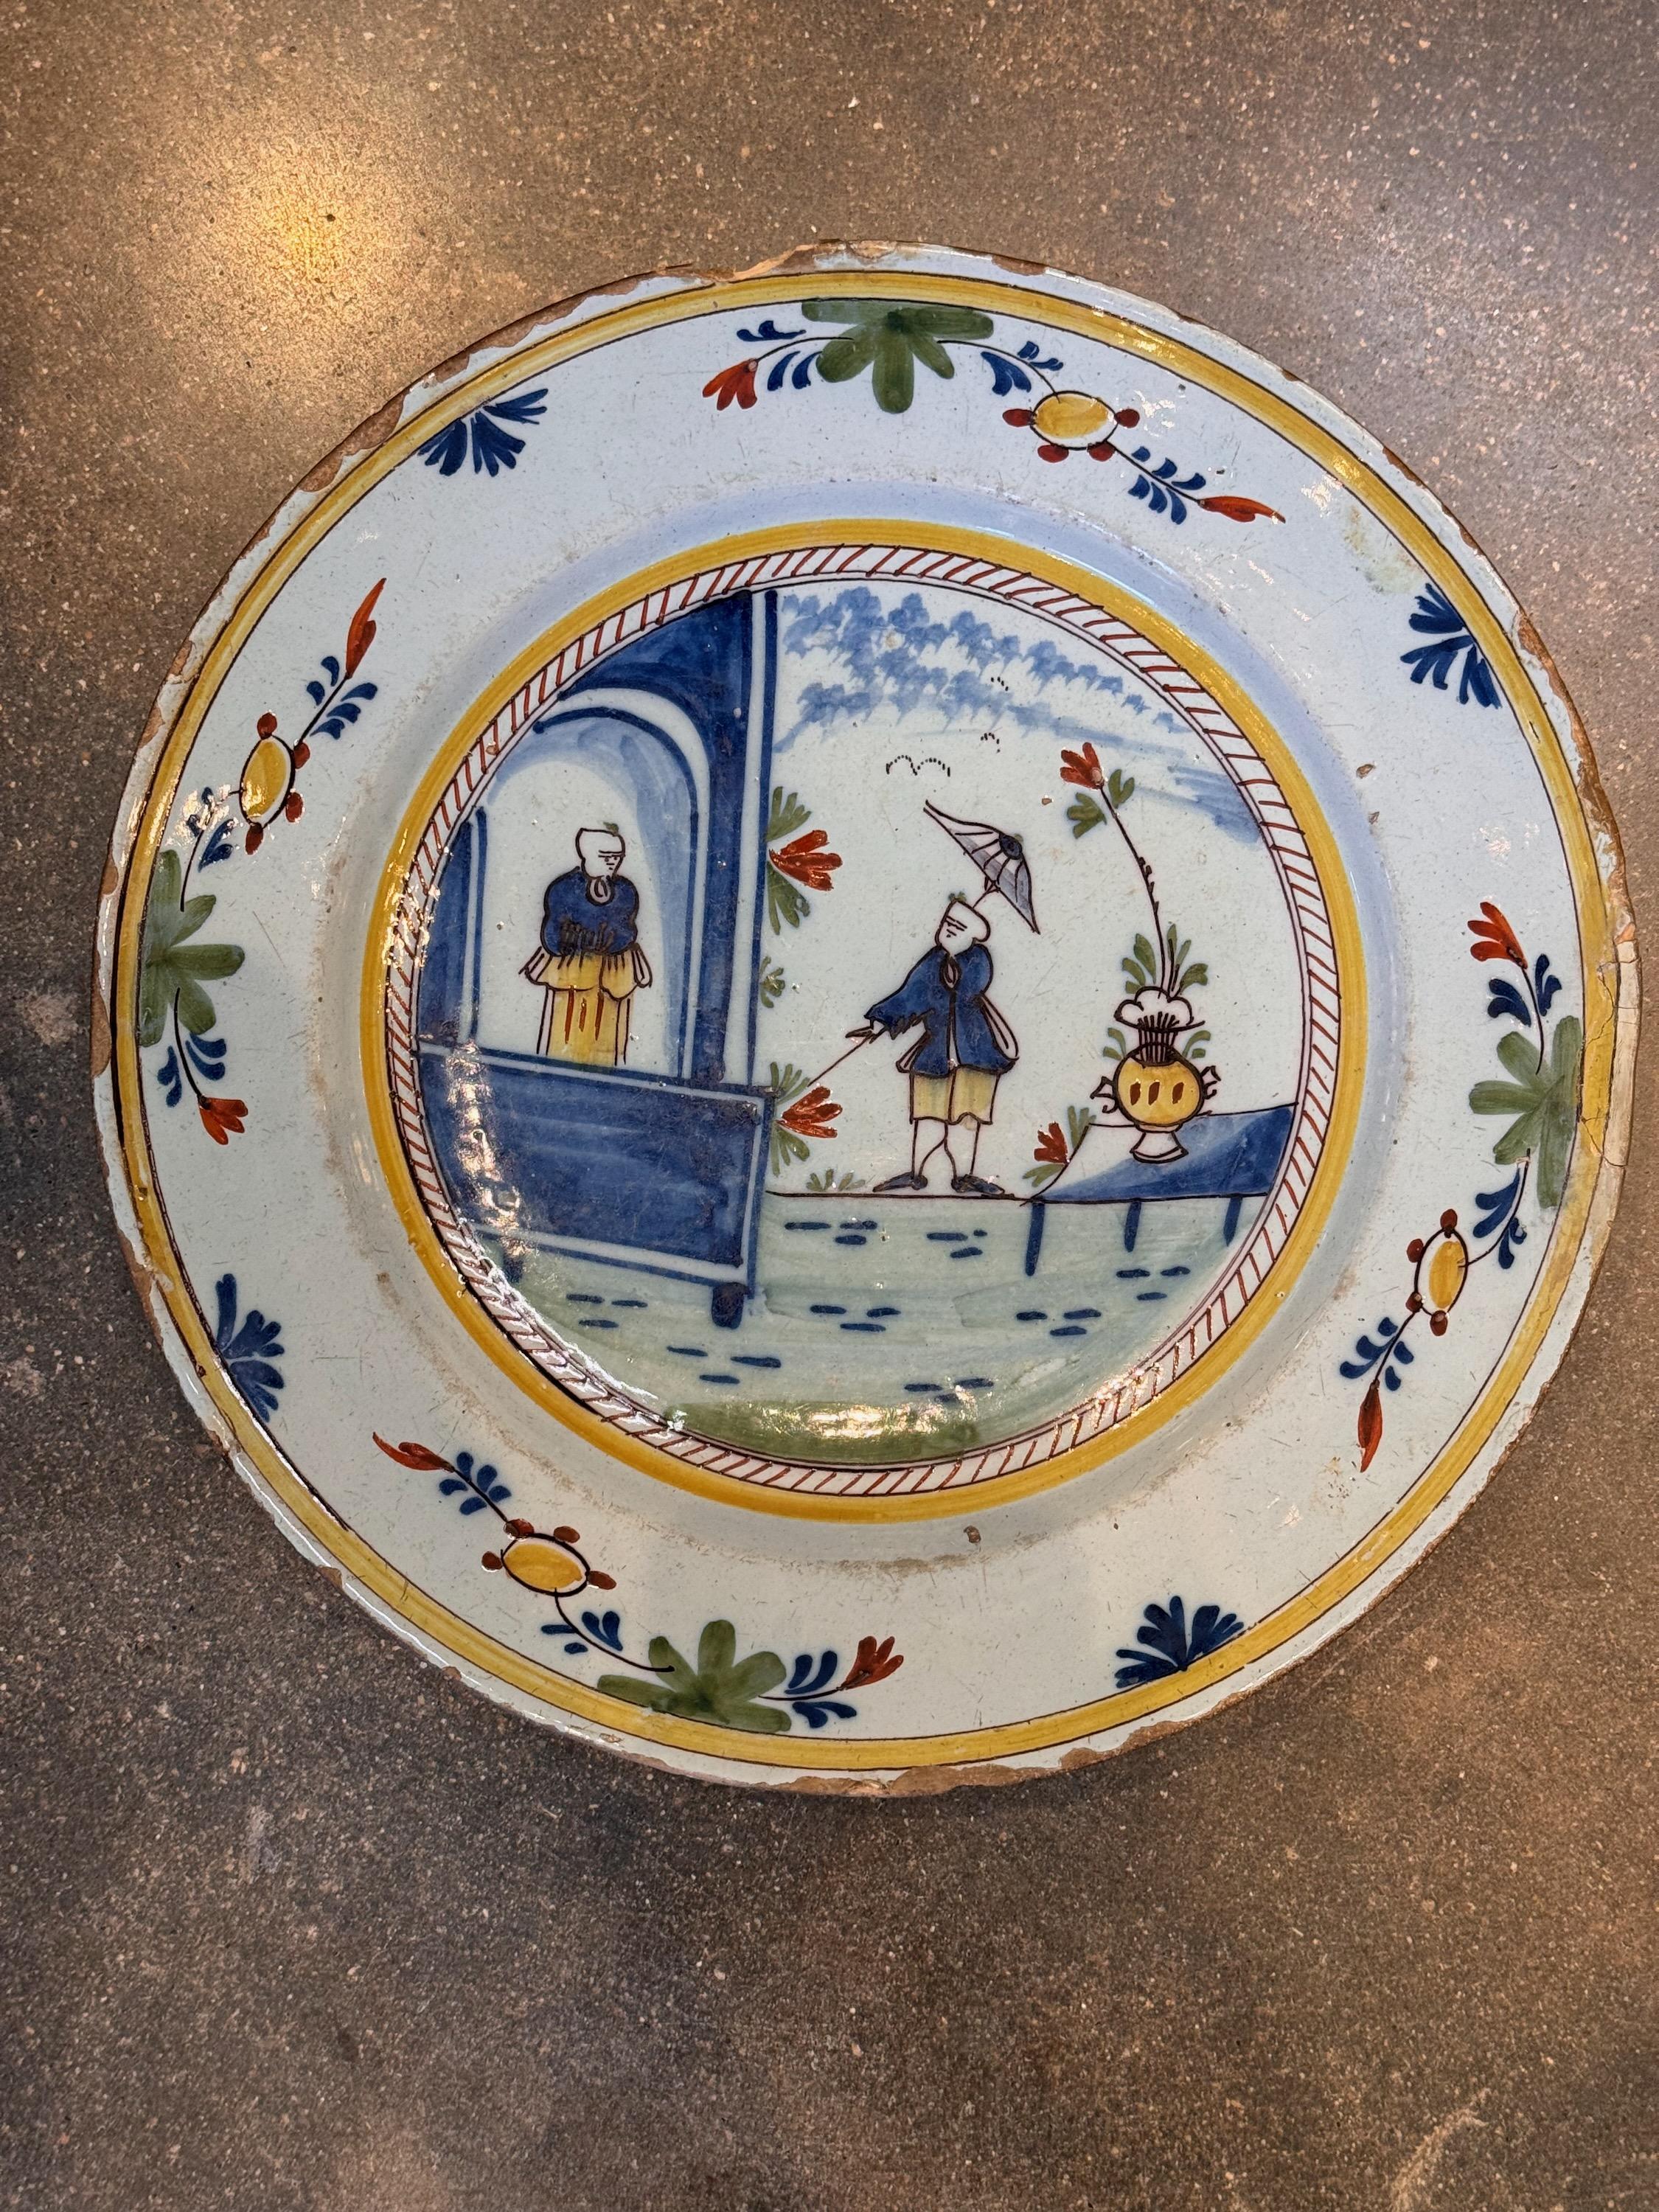 This polychrome Delft Charger is so pretty. Even with its imperfections.